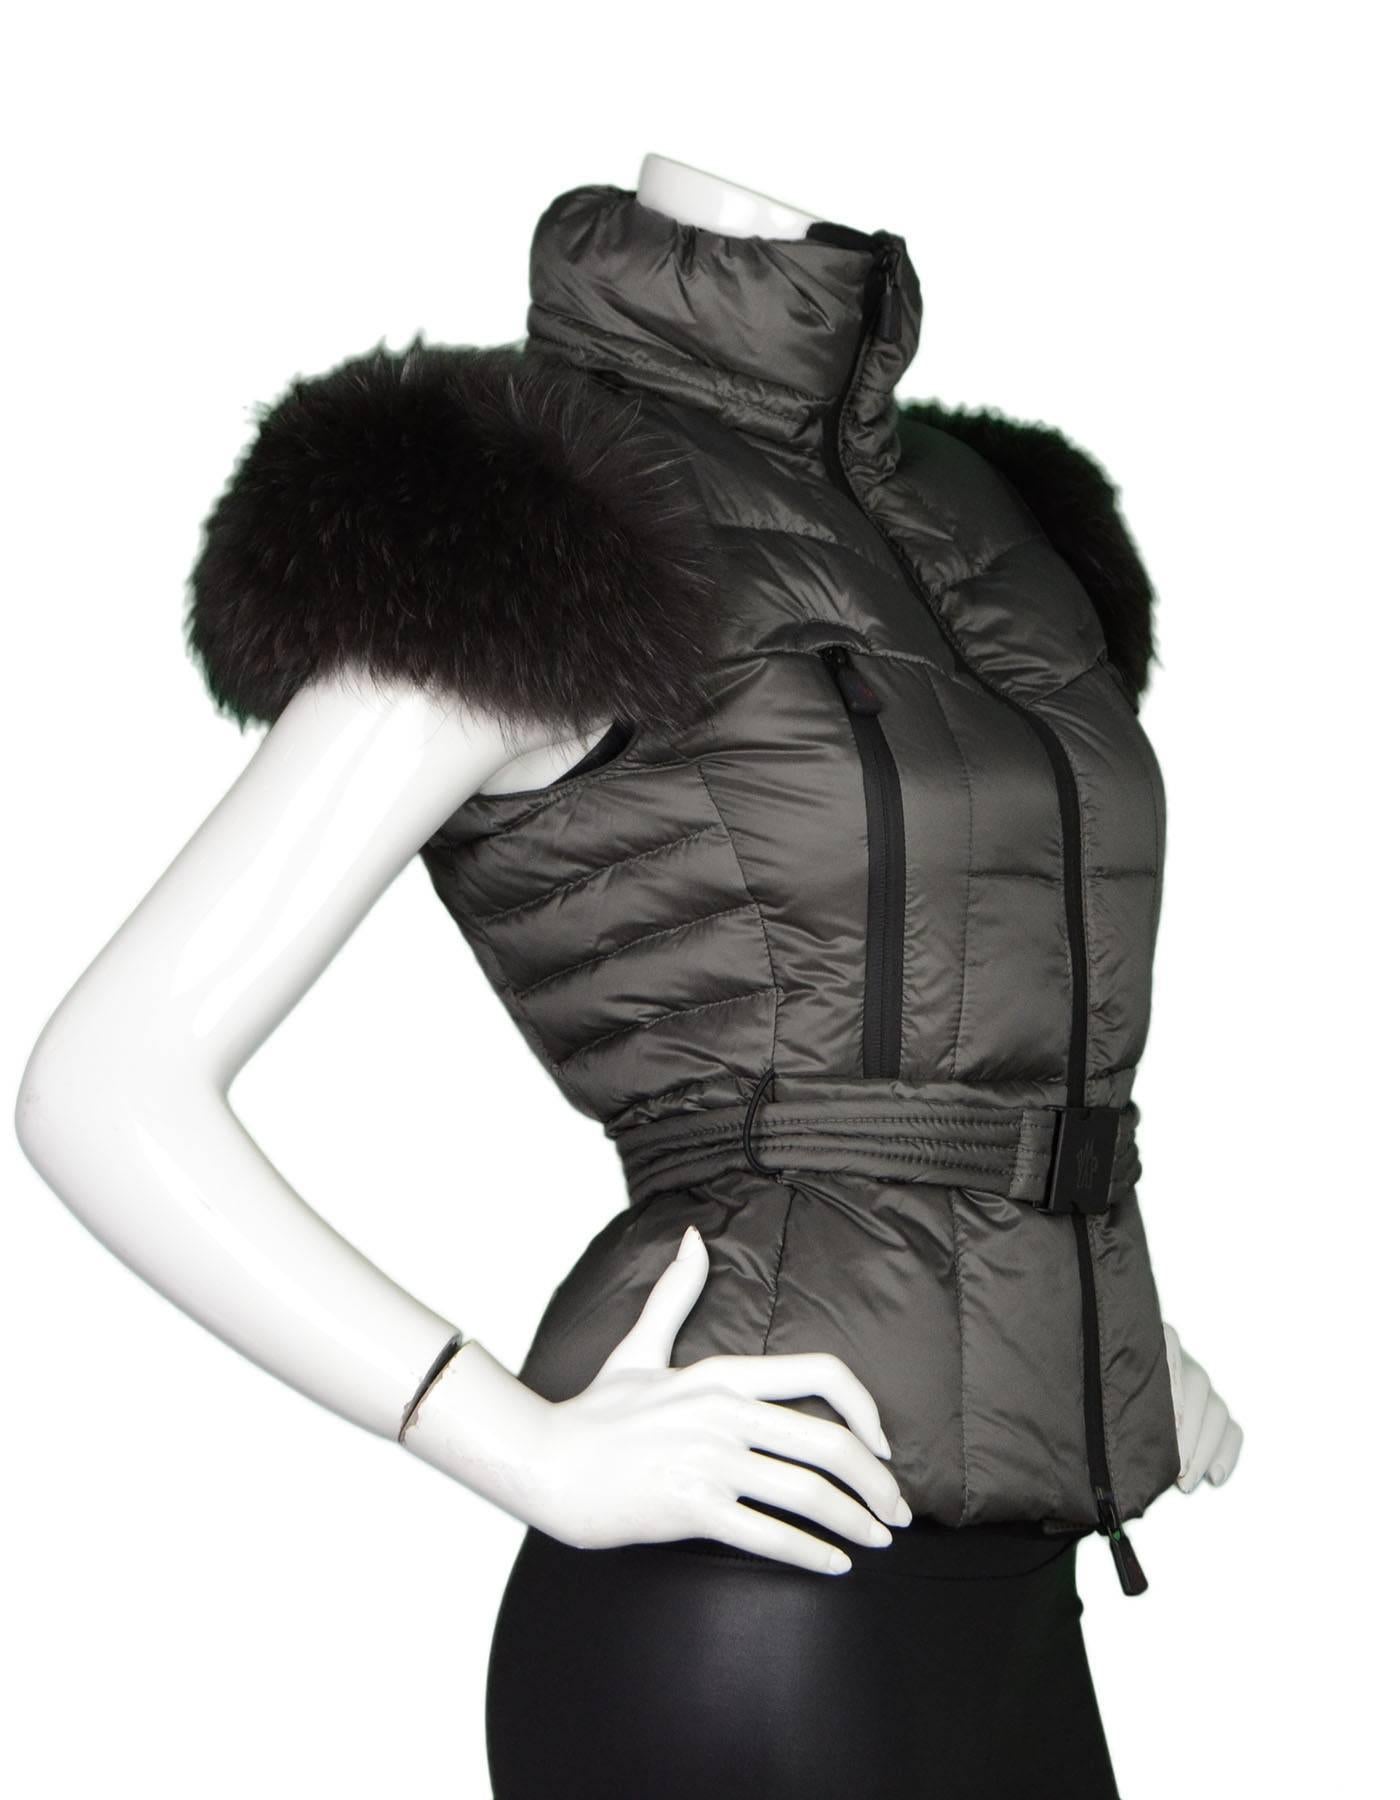 Moncler Dark Grey Down Vest Sz 0 NWT
Features detachable raccoon fur at shoulders

Made In: Romania
Color: Dark grey
Composition: 64% Nylon, 36%  Polyurethane
Lining: Black, 100% Nylon
Filling: Down feathers
Closure/Opening: Double zip up